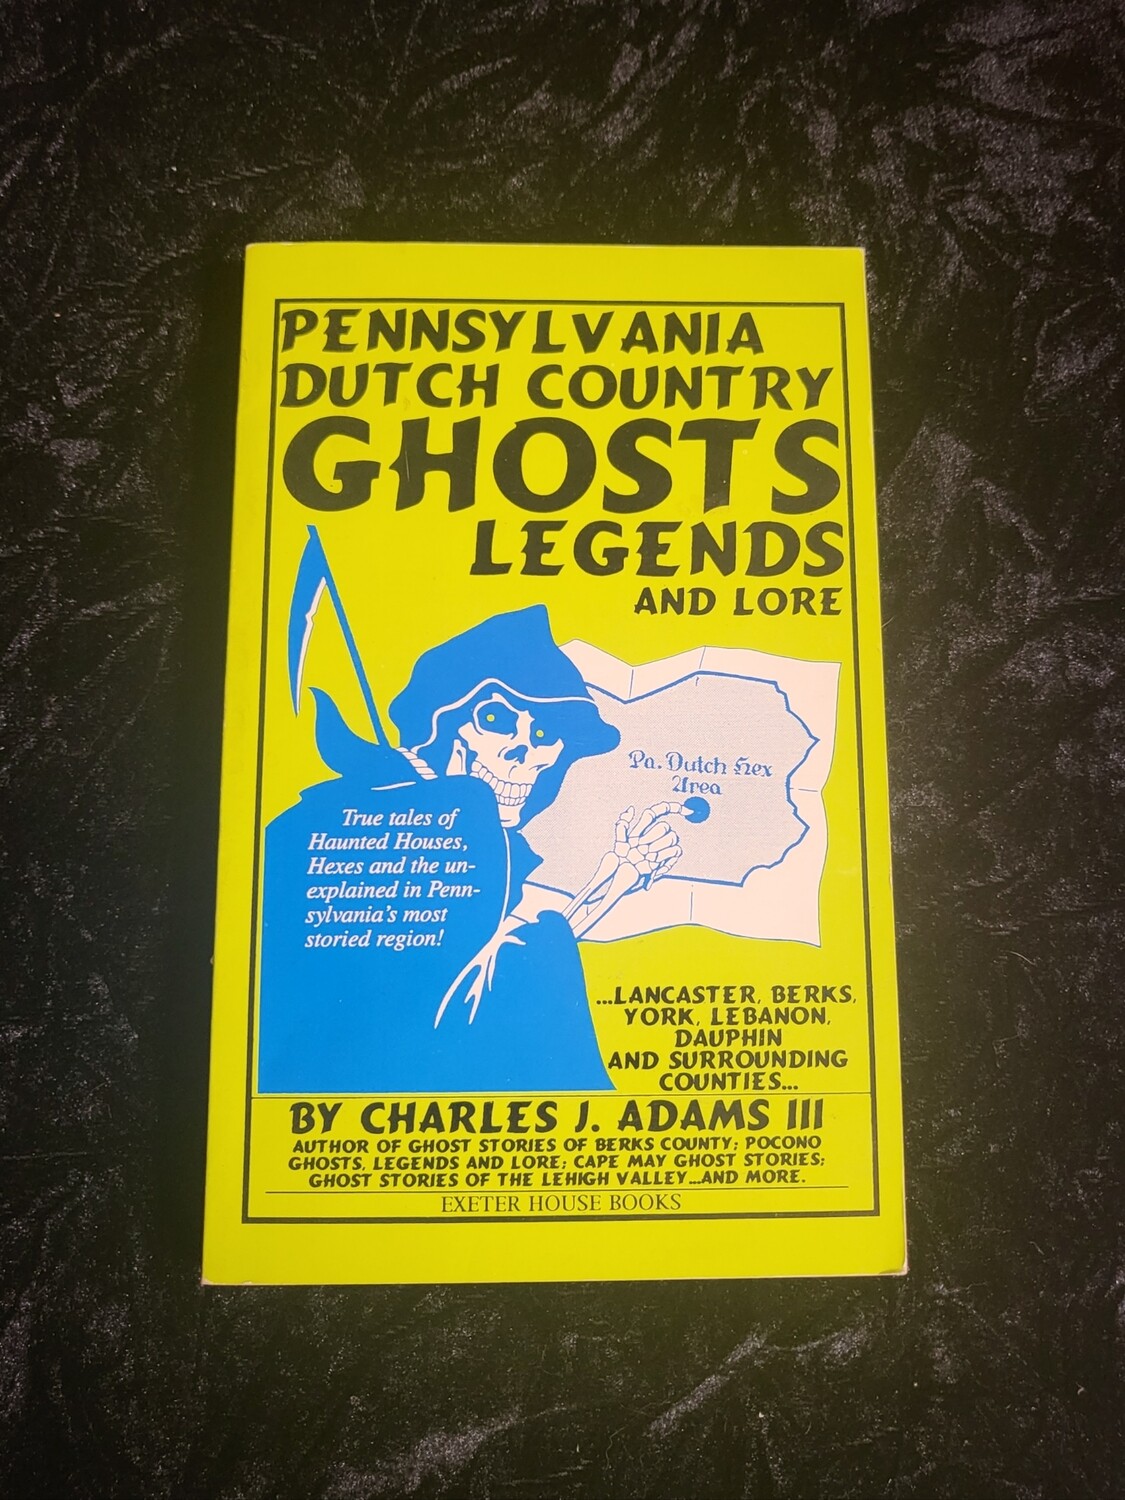 Pennsylvania Dutch County Ghosts Legends and Lore